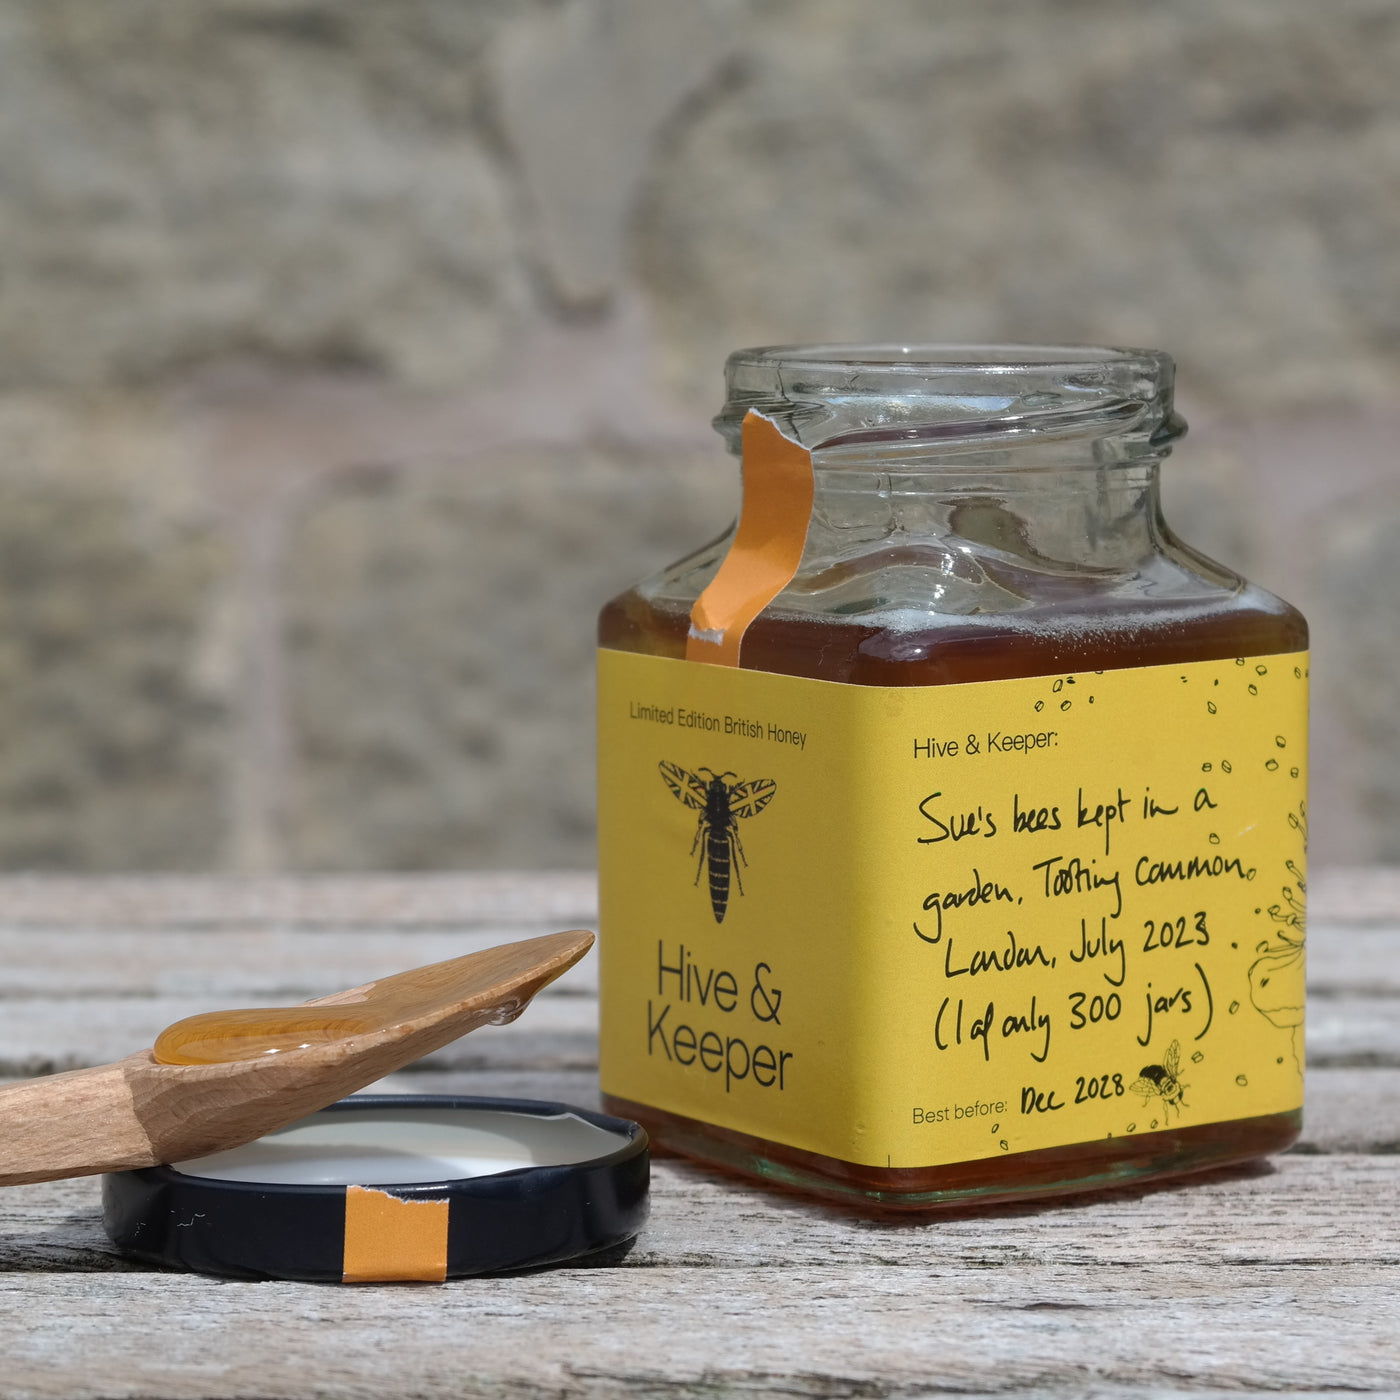 Honey from a garden , Tooting Common, London